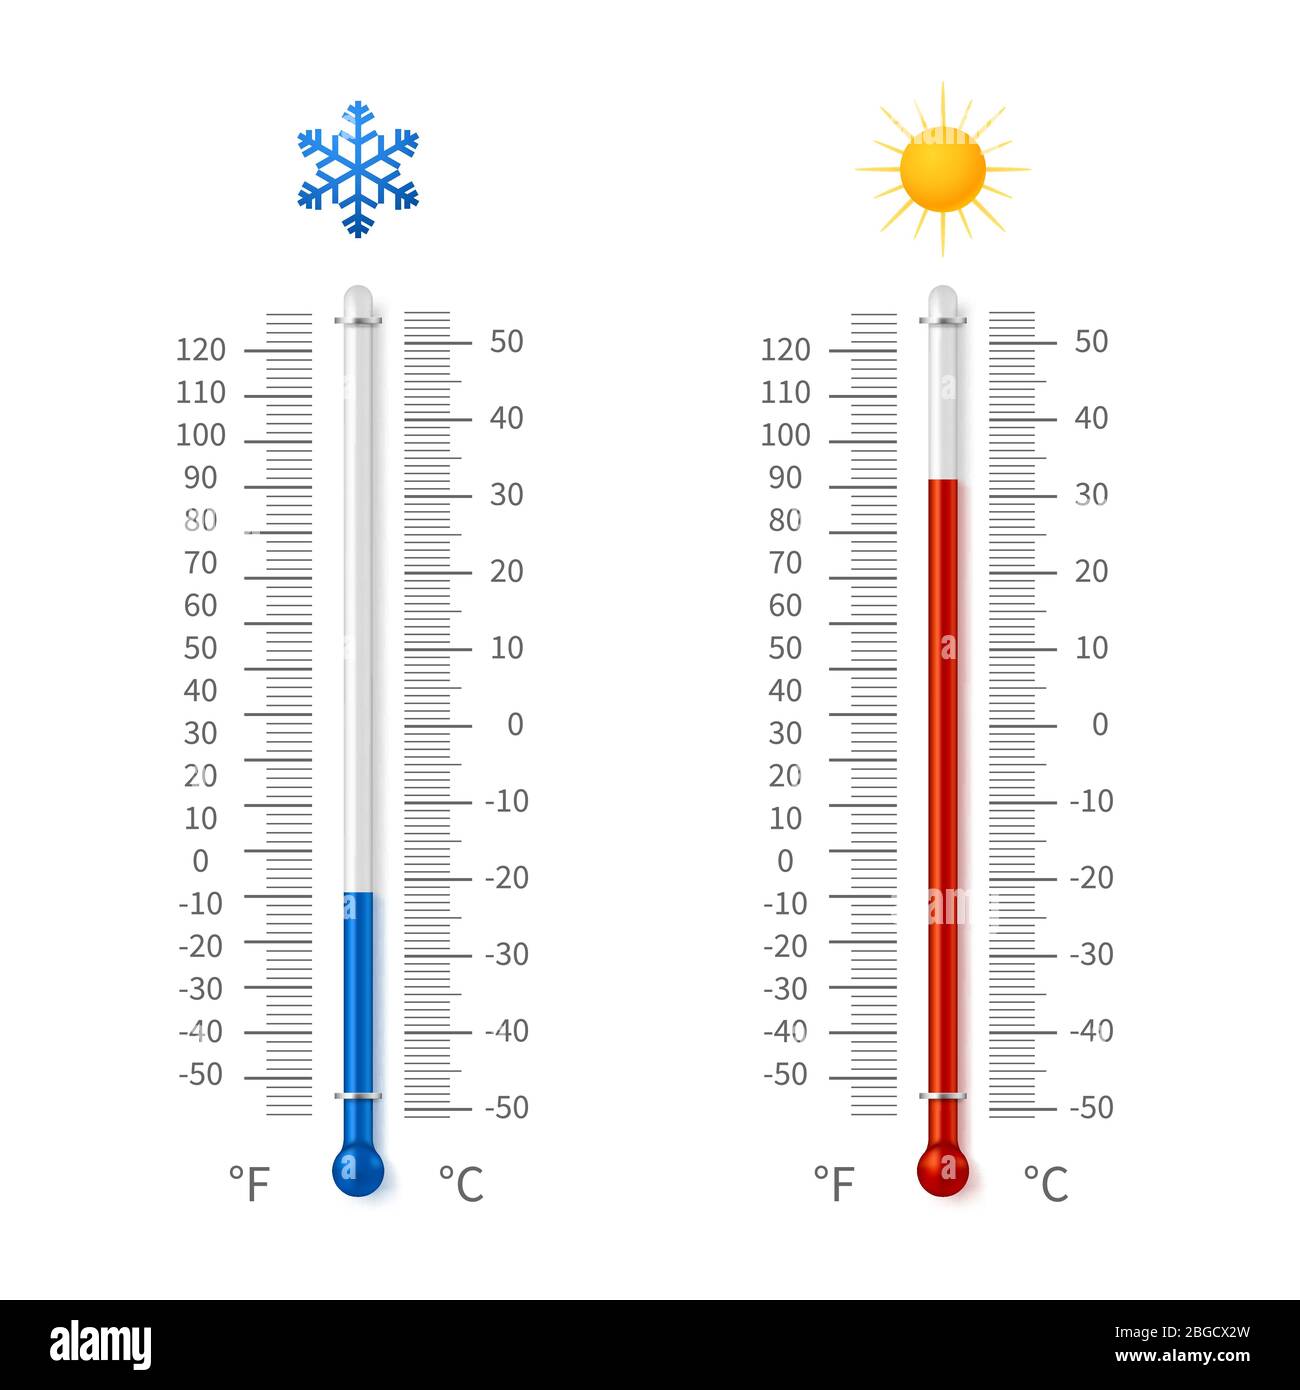 Thermometer equipment showing hot or cold weather .Celsius and